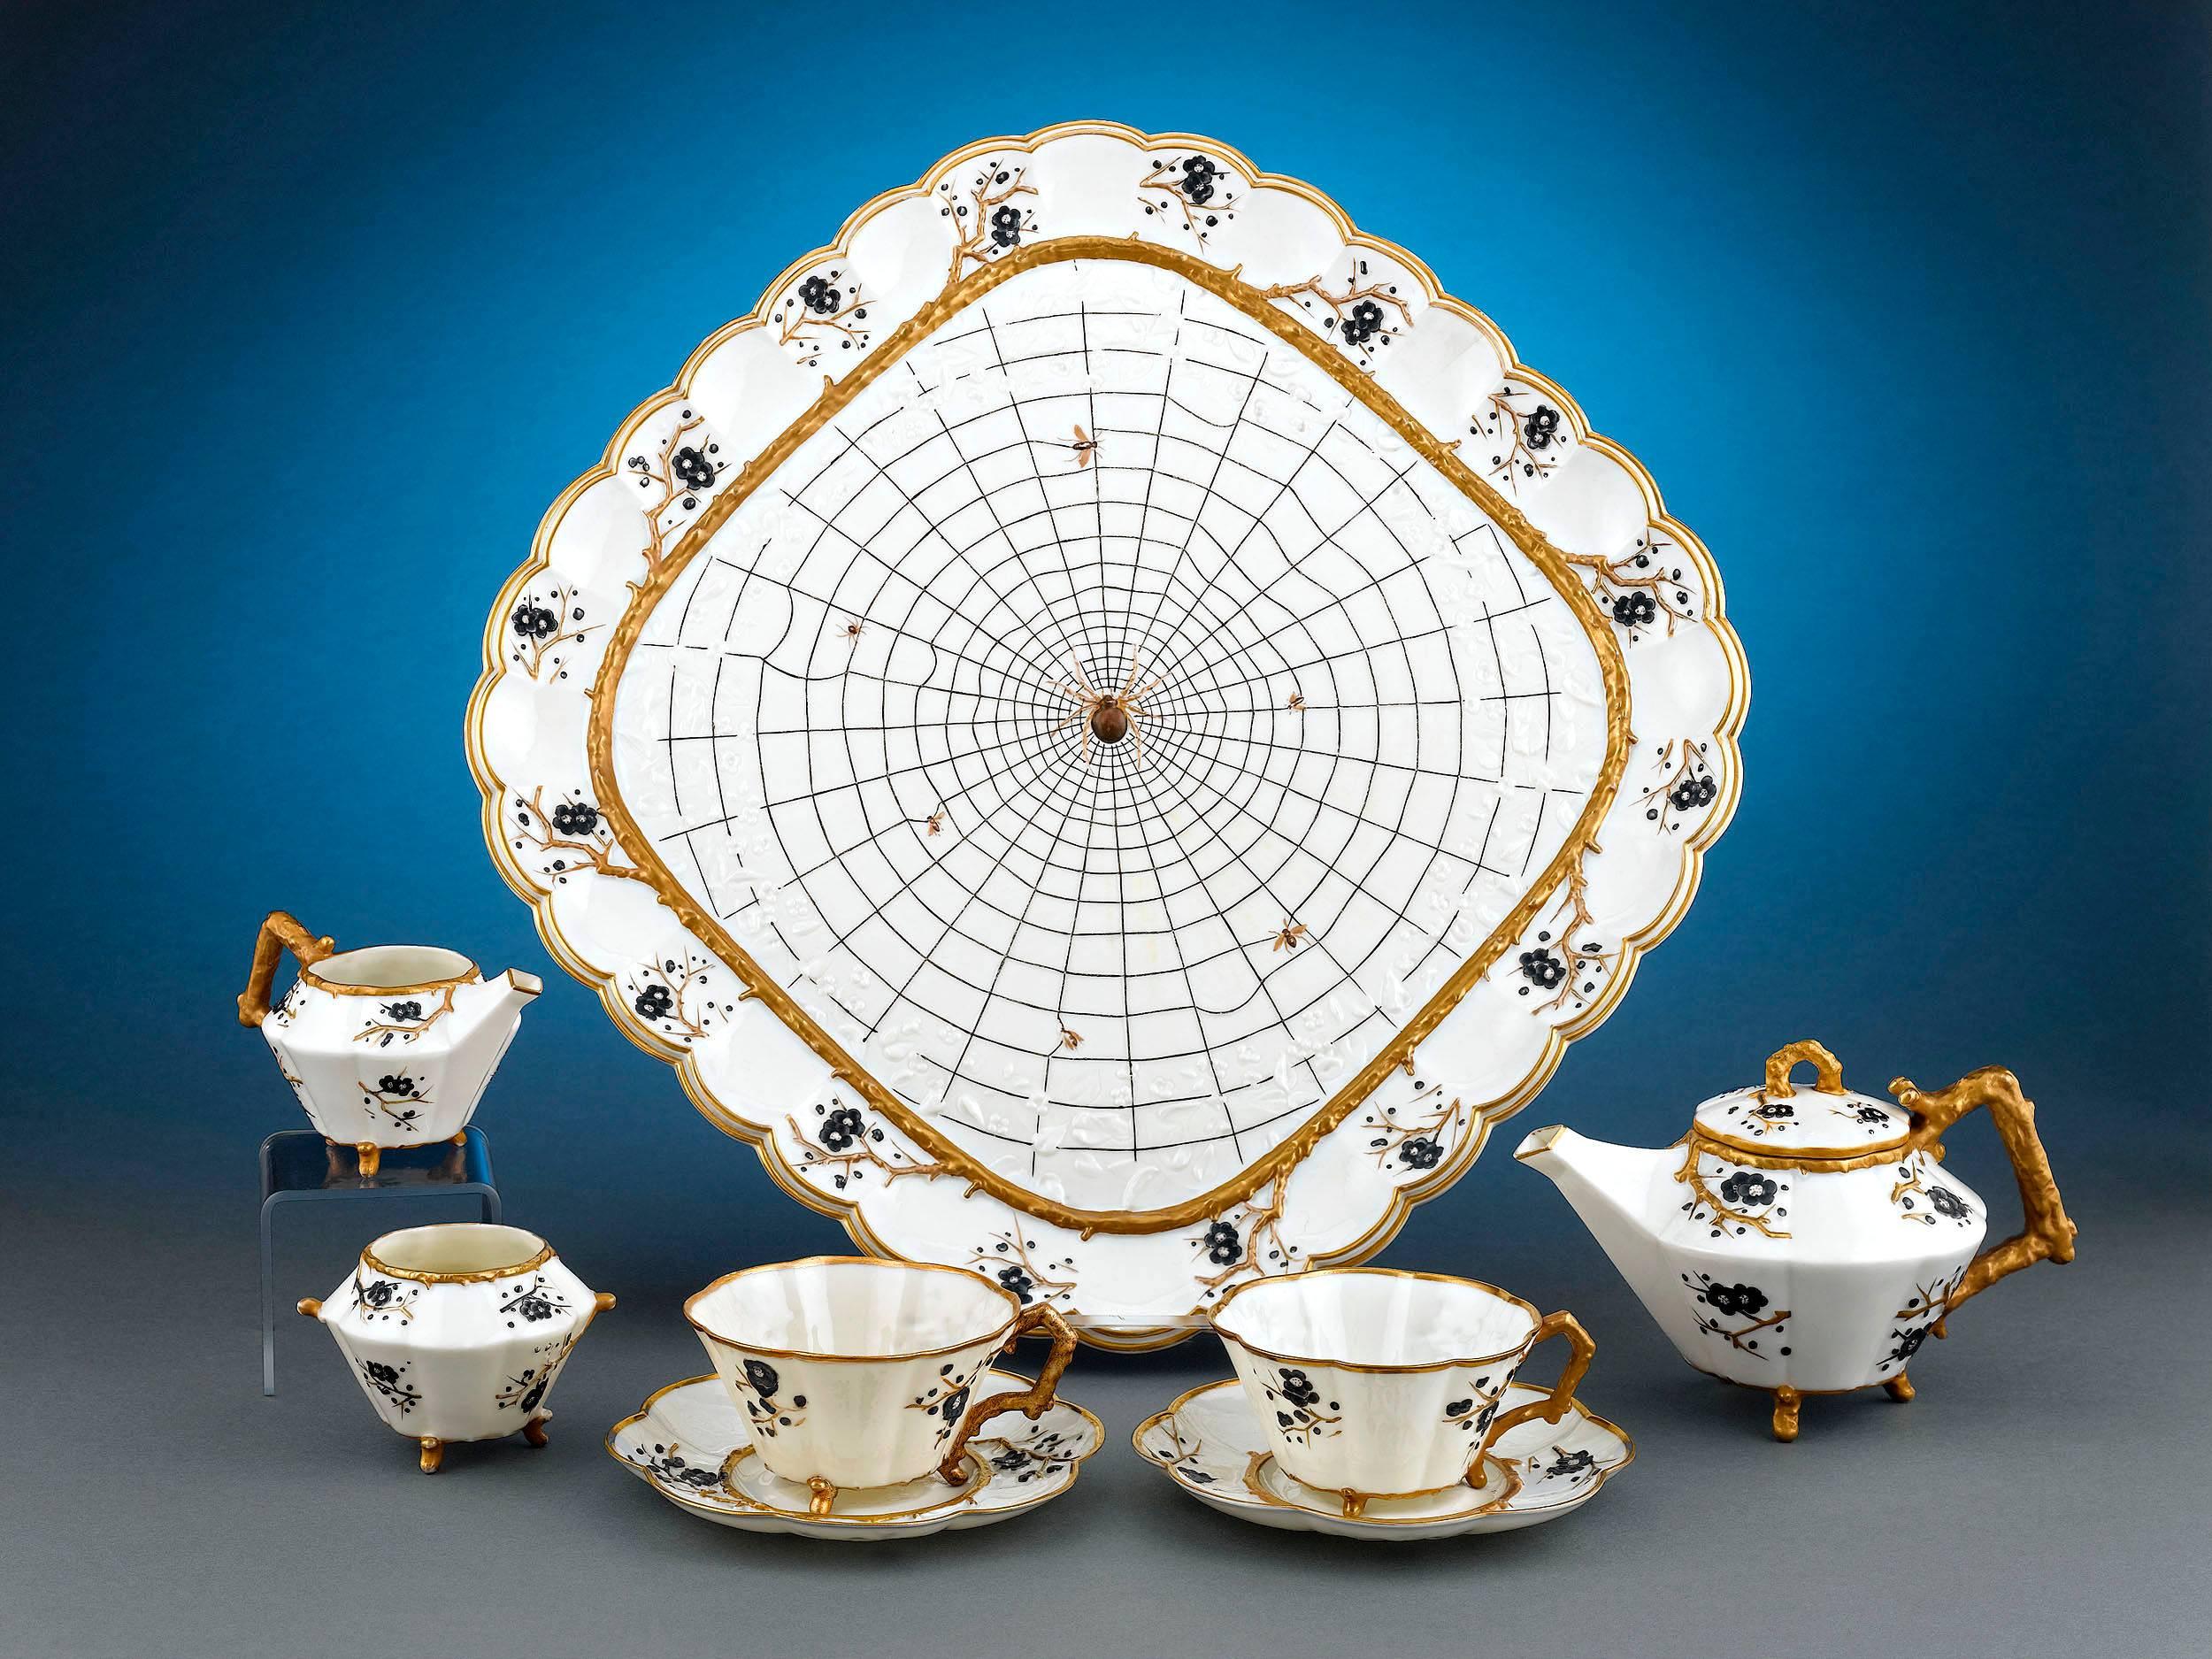 This delightful and rare Belleek dejeuner tea set exhibits the intriguing Thorn pattern. Comprised of a teapot, creamer, sugar bowl and two teacups and saucers, all set upon a square spider web tea tray with a scalloped rim, this delicate service